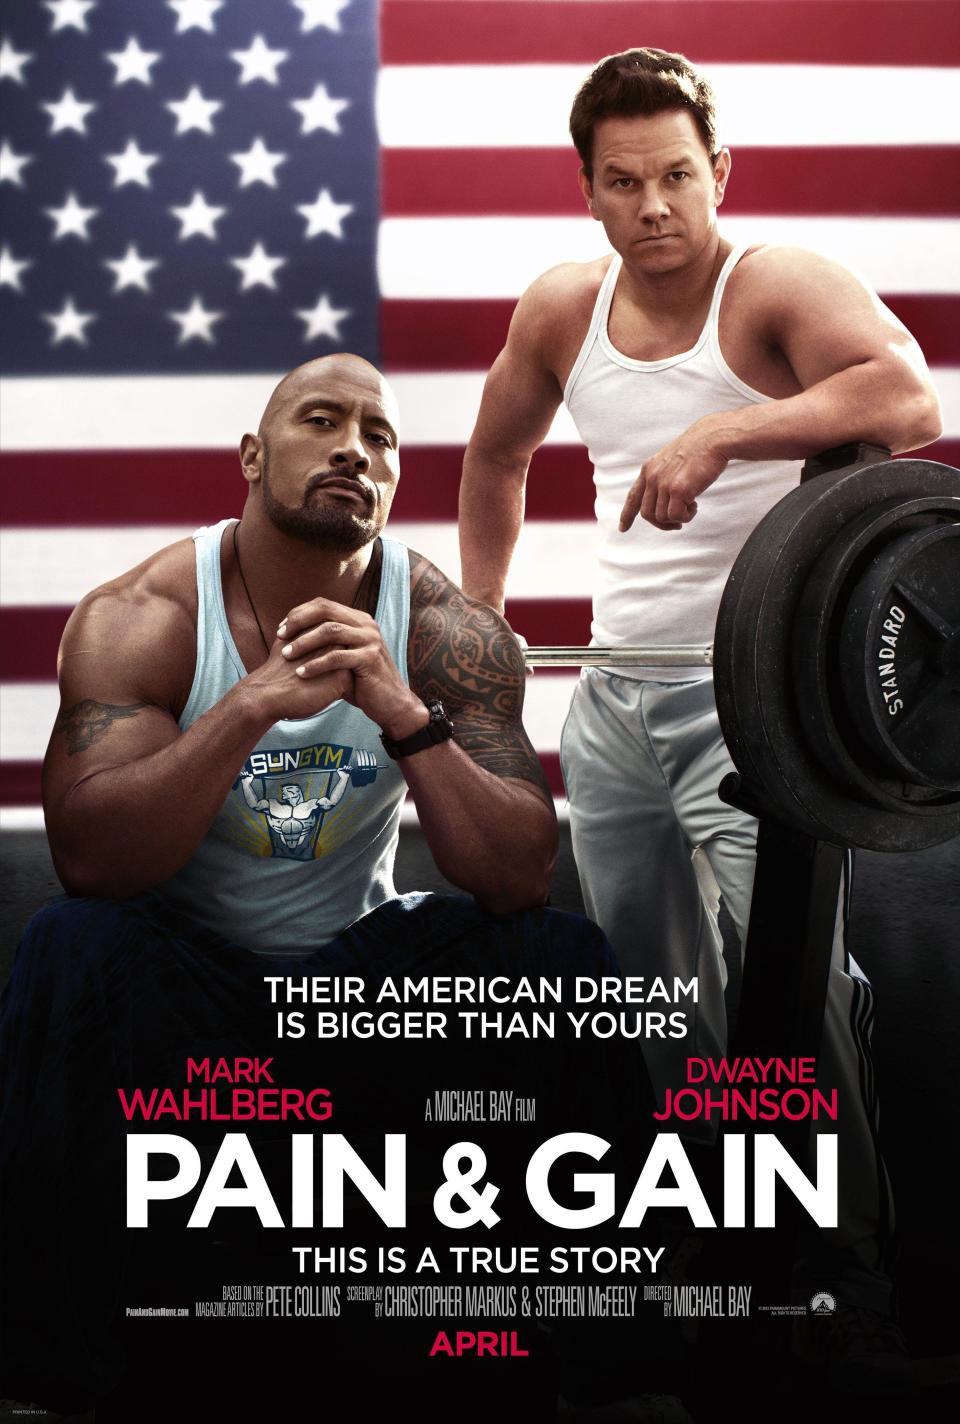 Poster image for the movie "Pain & Gain" depicting Dwayne "The Rock" Johnson and Mark Wahlberg sitting in front of the American flag